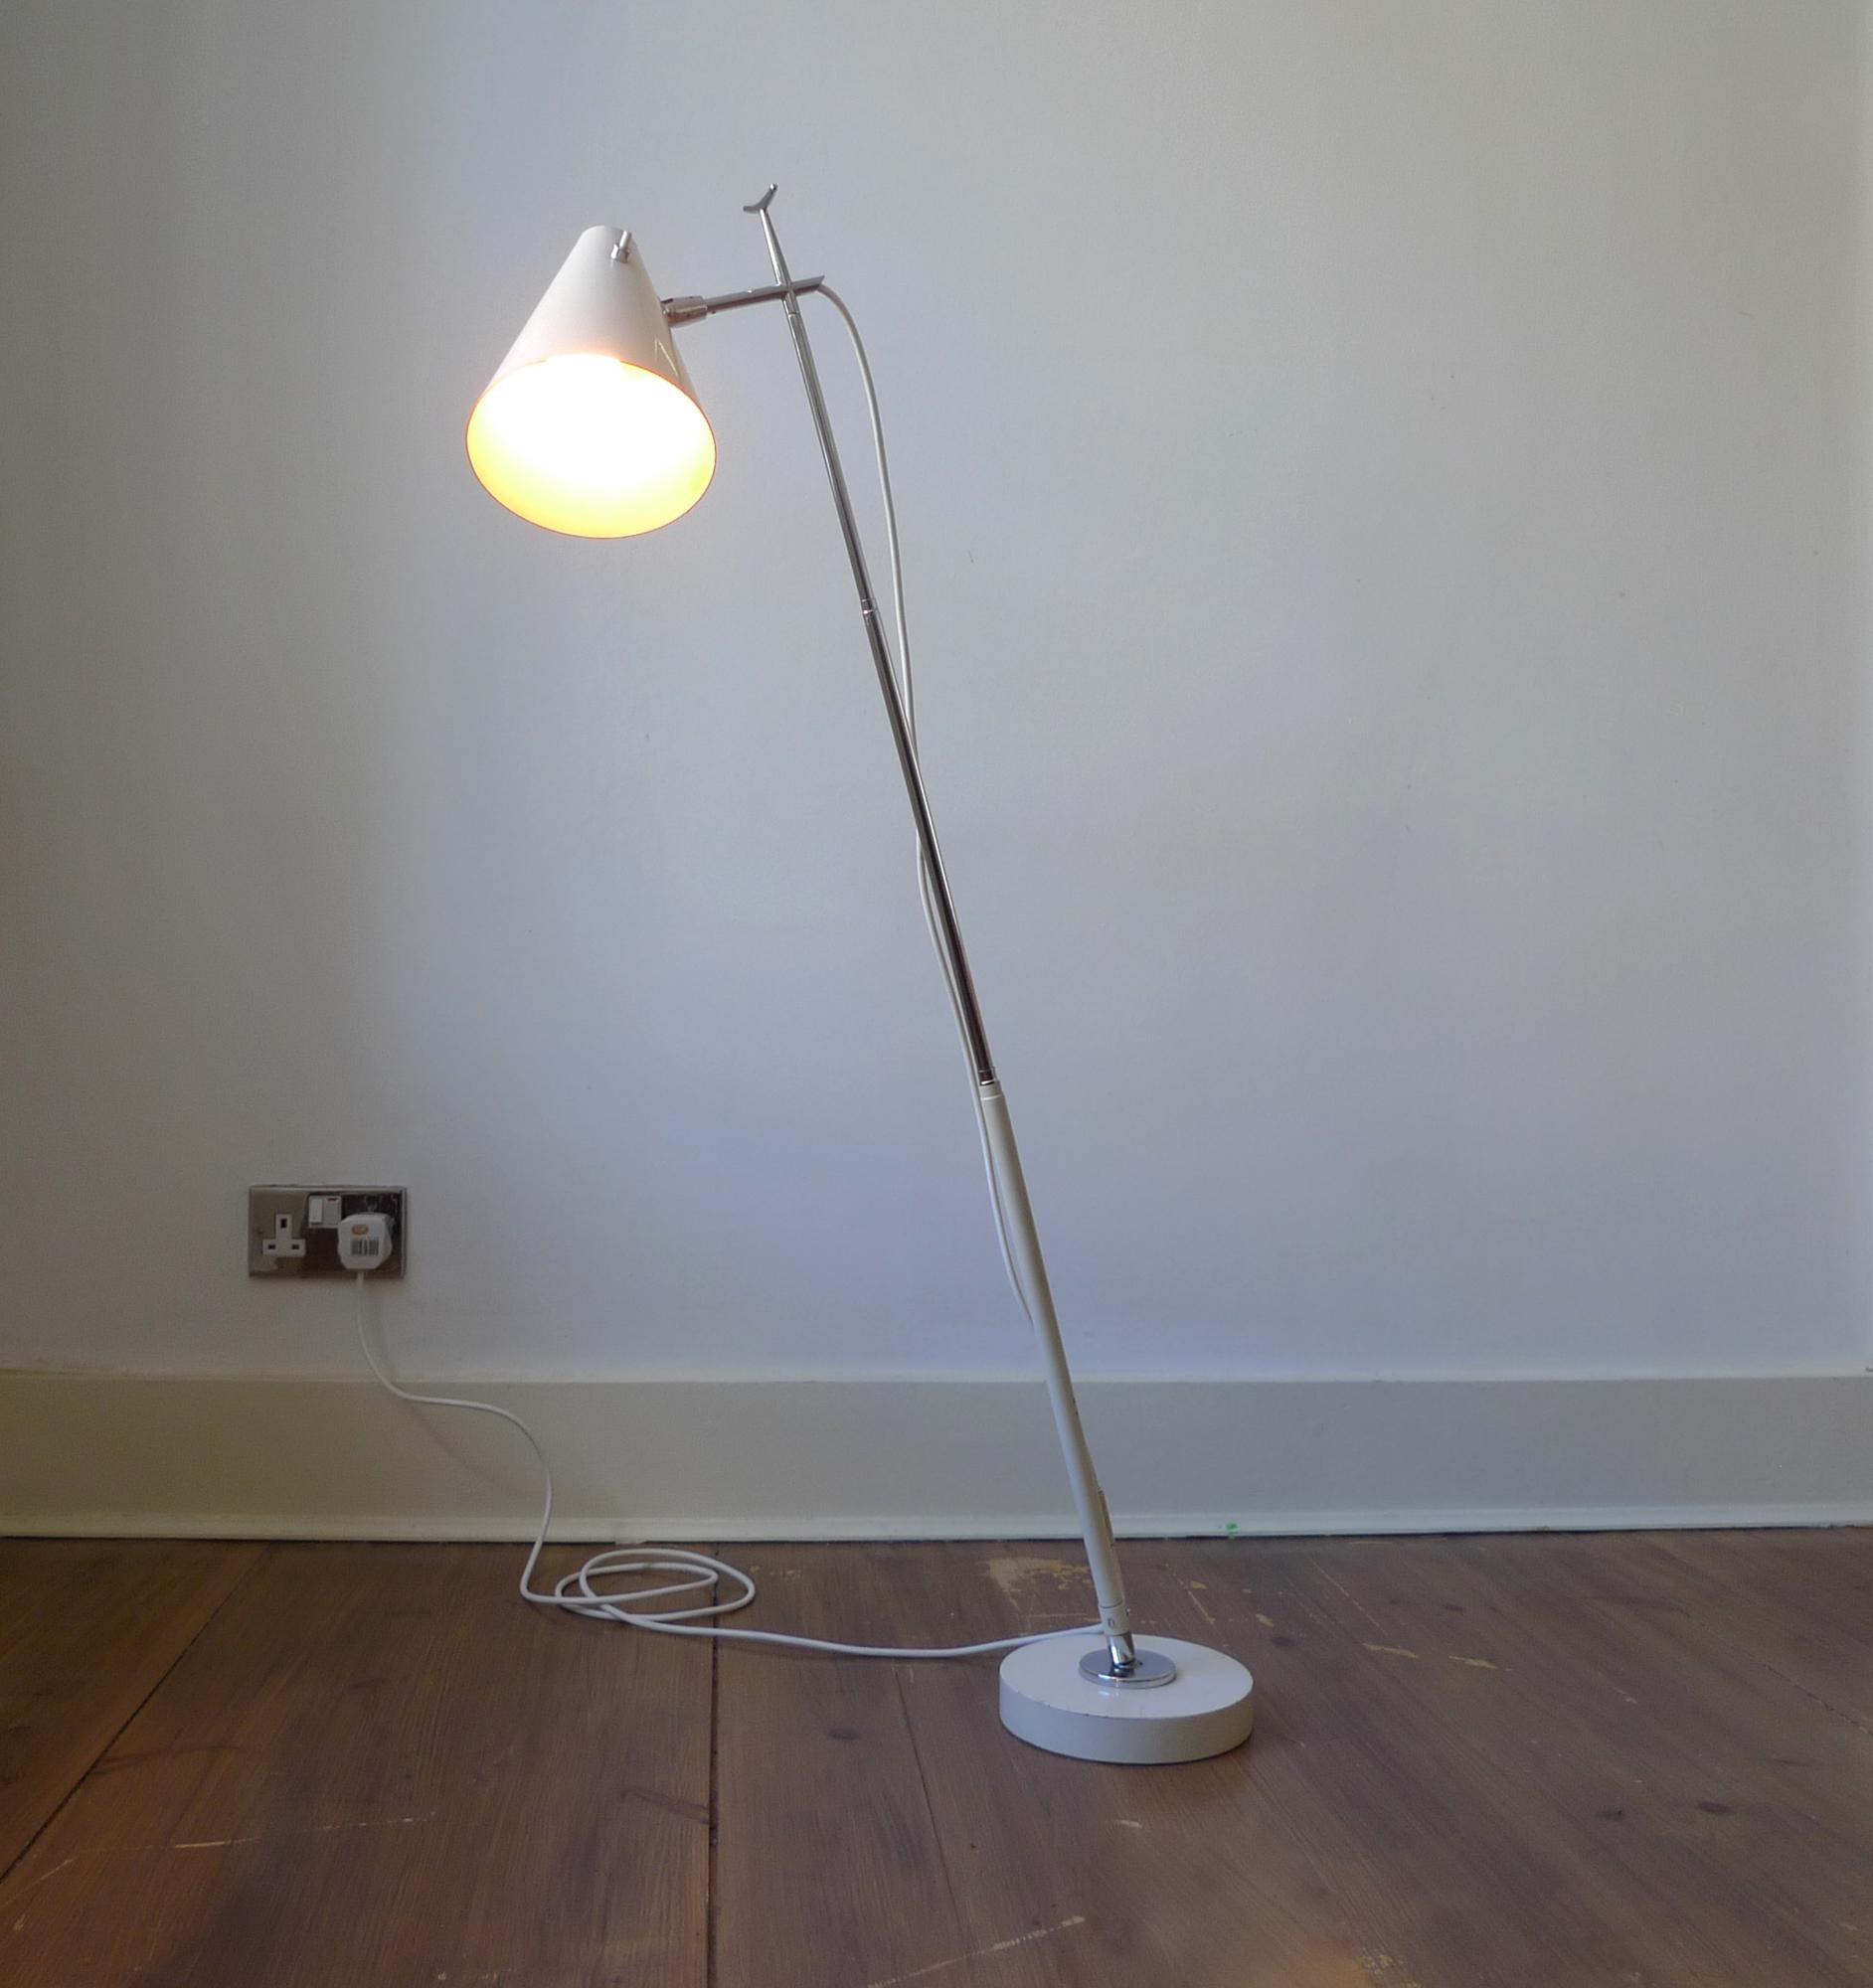 For sale a very rare and highly collectable Mid-Century Modernist, Model 201 telescopic Table/Floor Lamp designed by Giuseppe Ostuni for O’Luce, Milano in c.1955.

The design comprises a cream lacquered base, pivoting lower stem & shade and a chrome